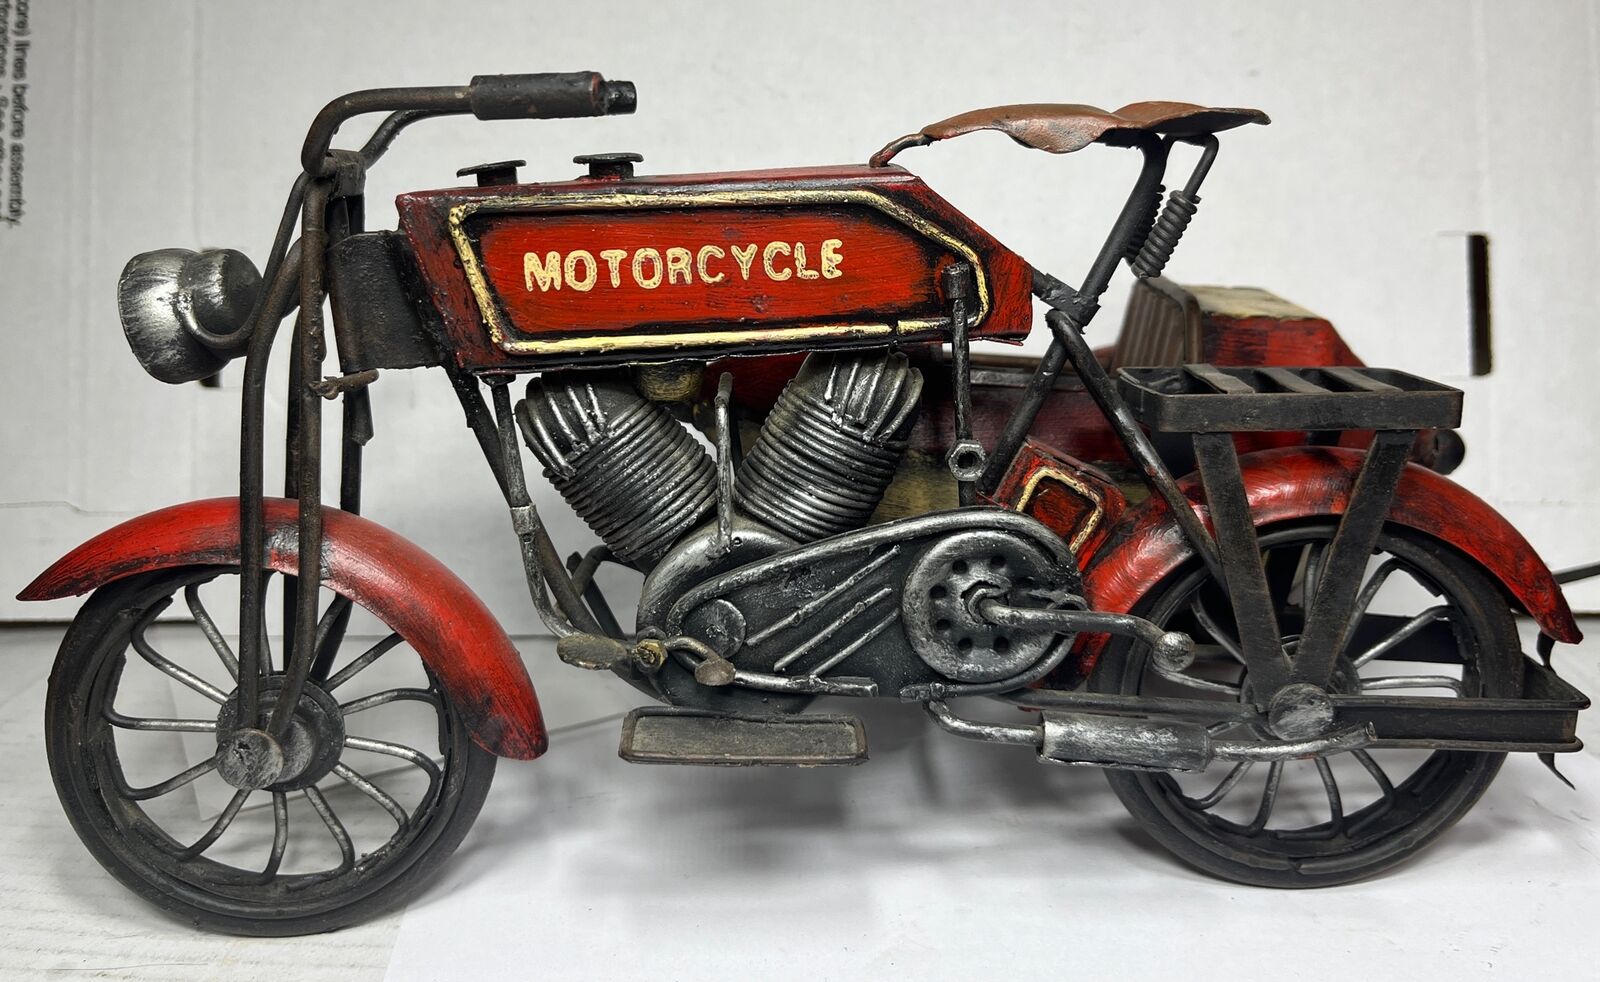 Rare Vintage Motorcycle with Sidecar Large Art Sculpture Model Display